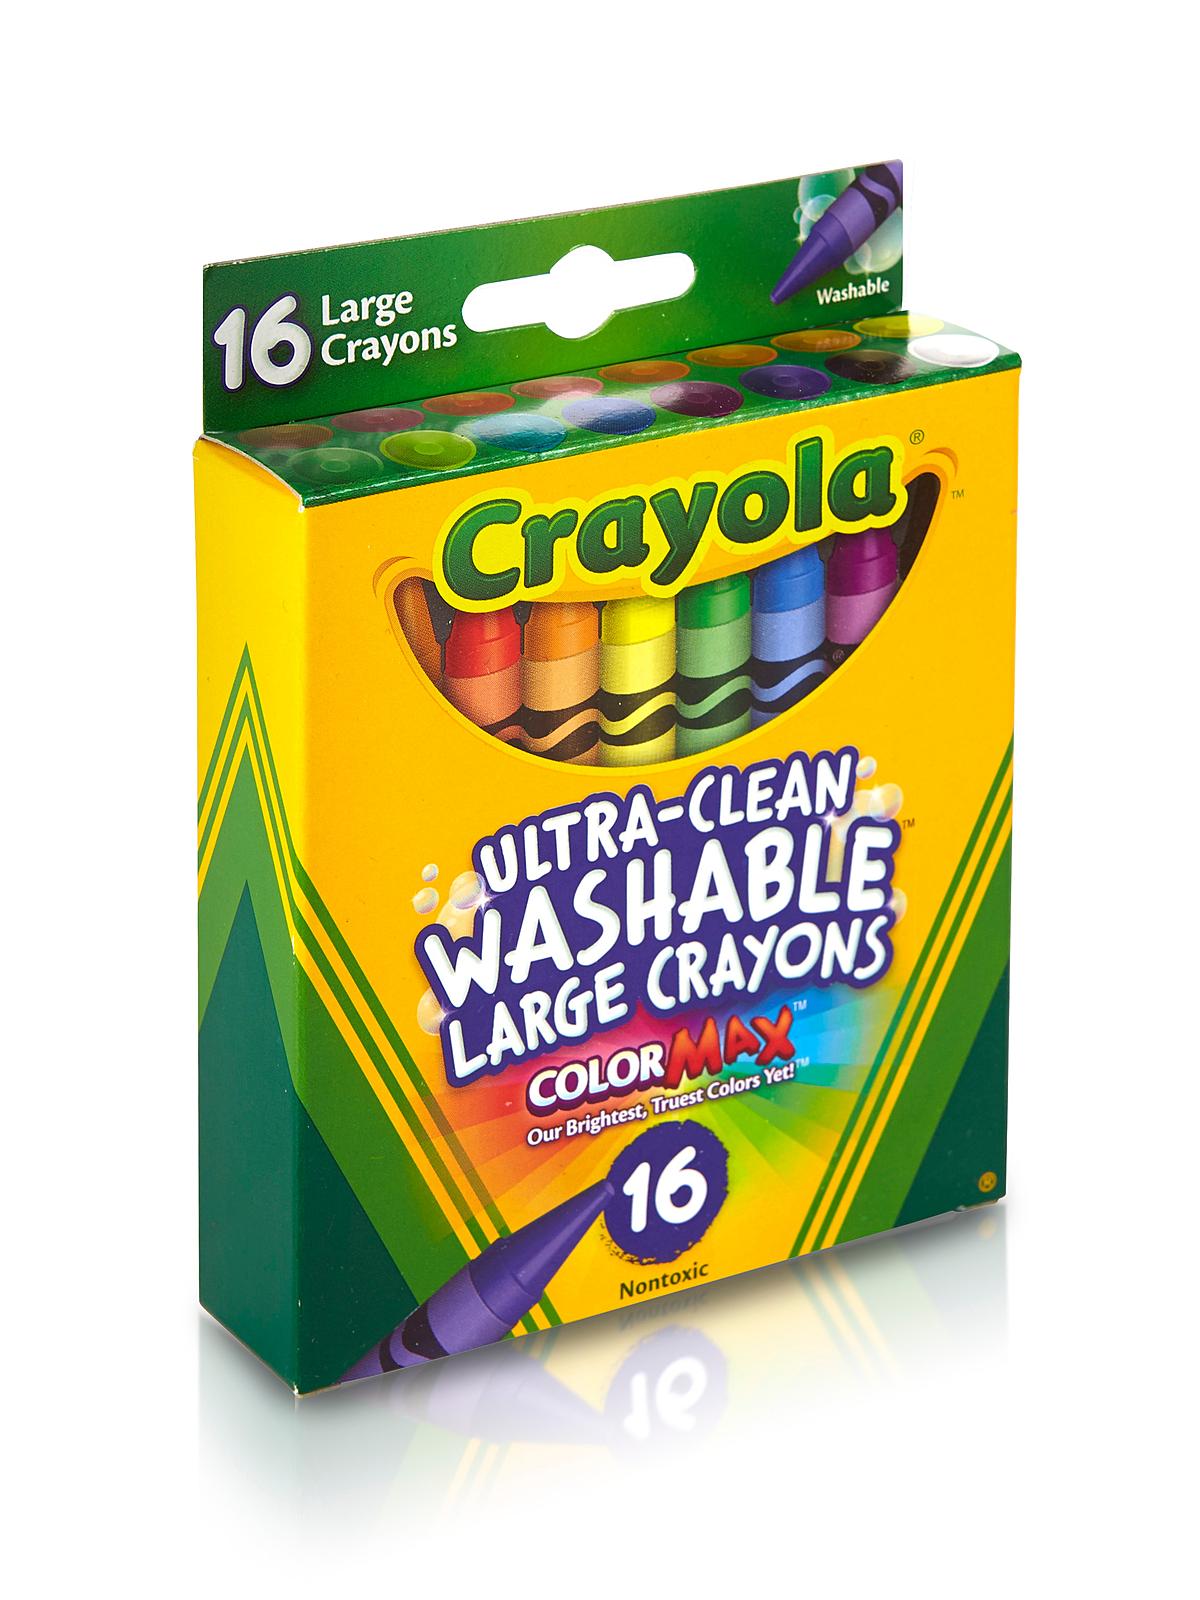 Ultra-clean Washable Large Crayons Box Of 16